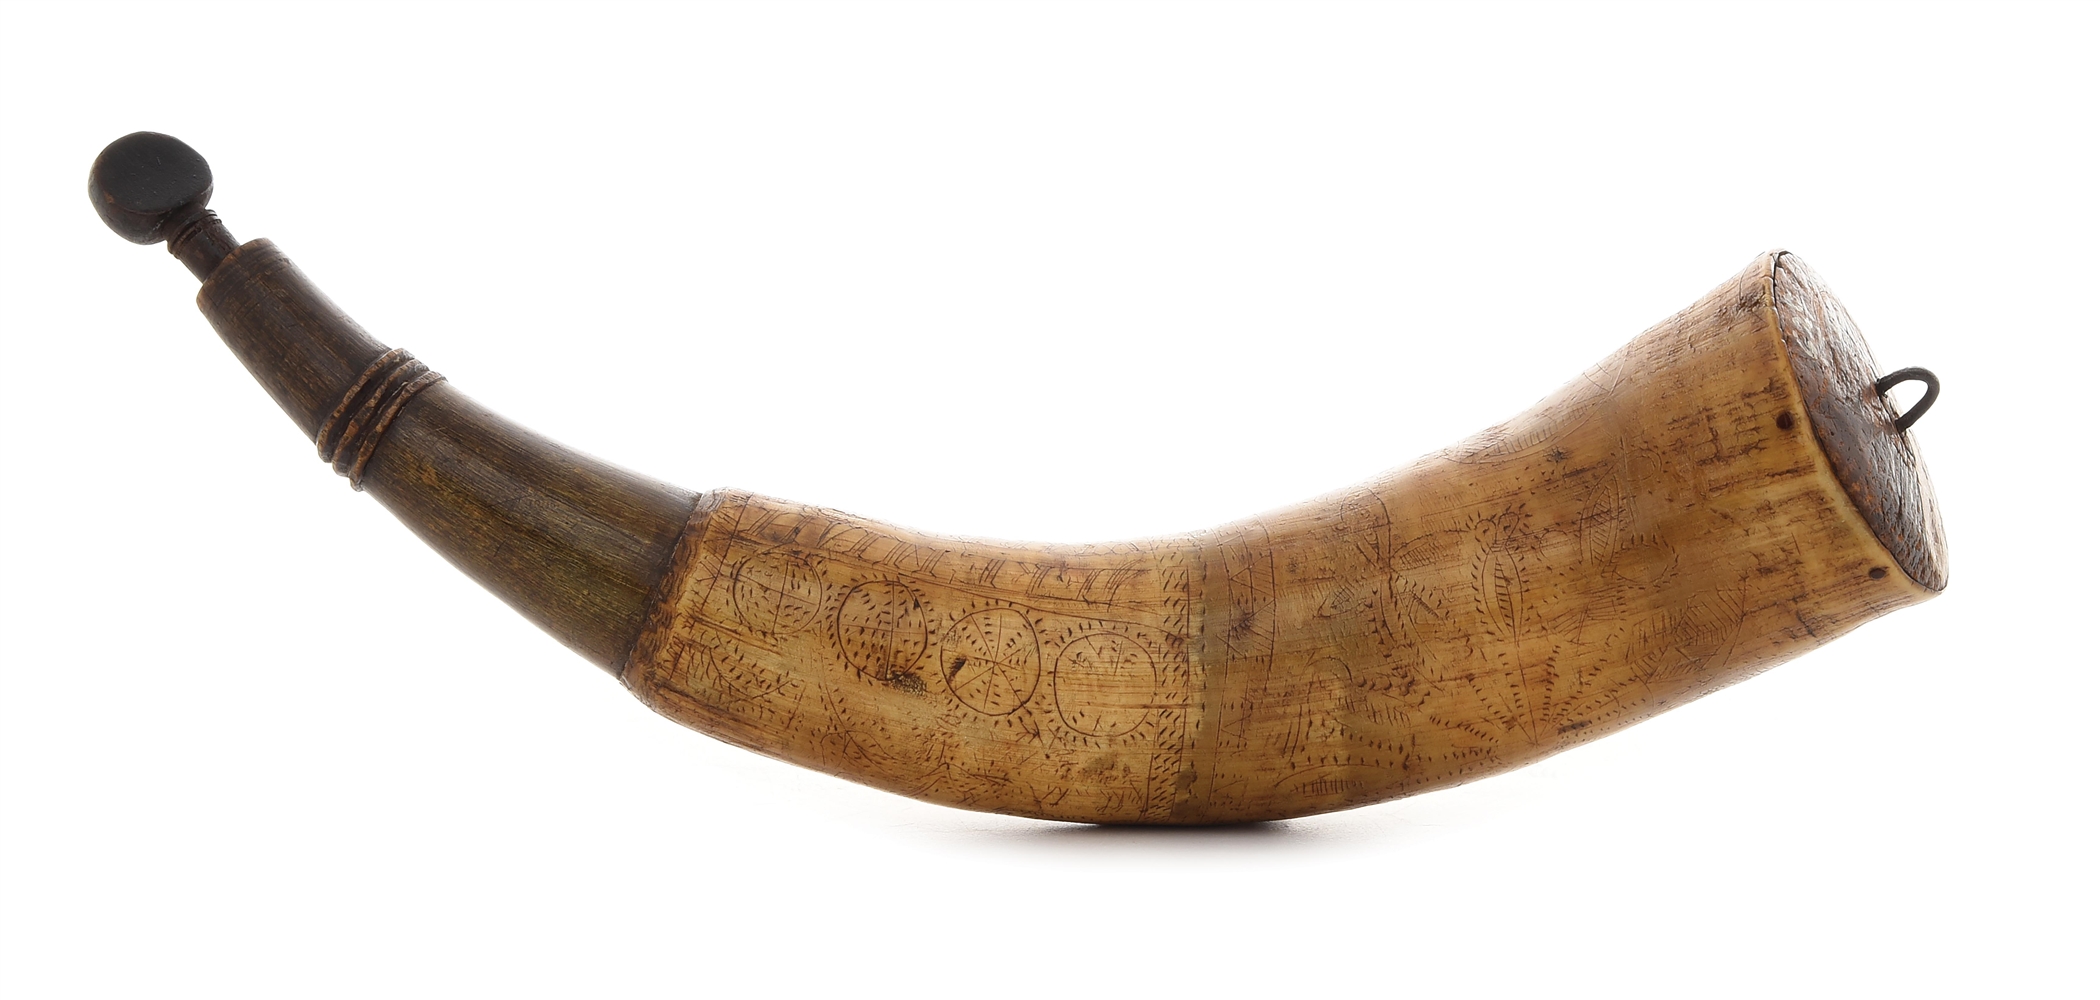 ENGRAVED 1756 POWDER HORN OF JERIMIAH WARD, MARINE ON SHIP "OLIVER CROMWELL".